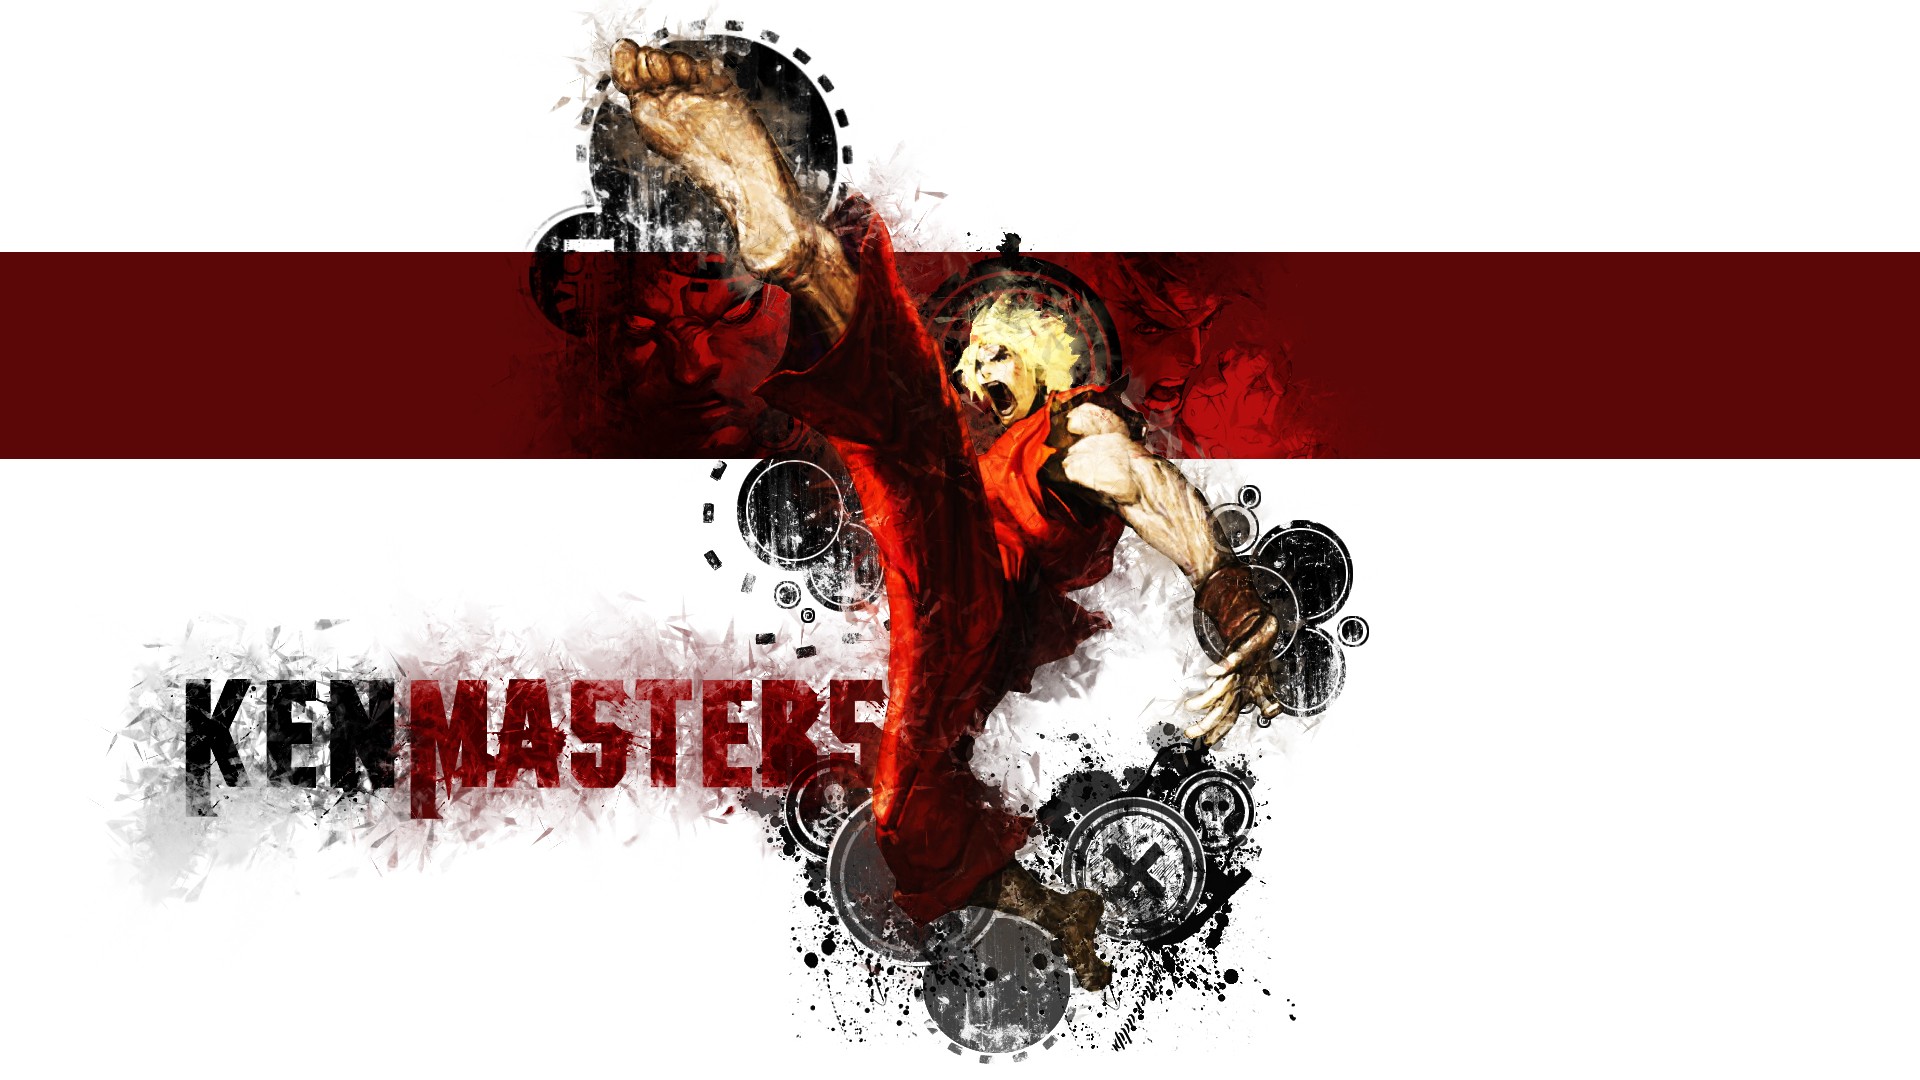 General 1920x1080 Street Fighter video games video game warriors video game art Ken Masters video game man